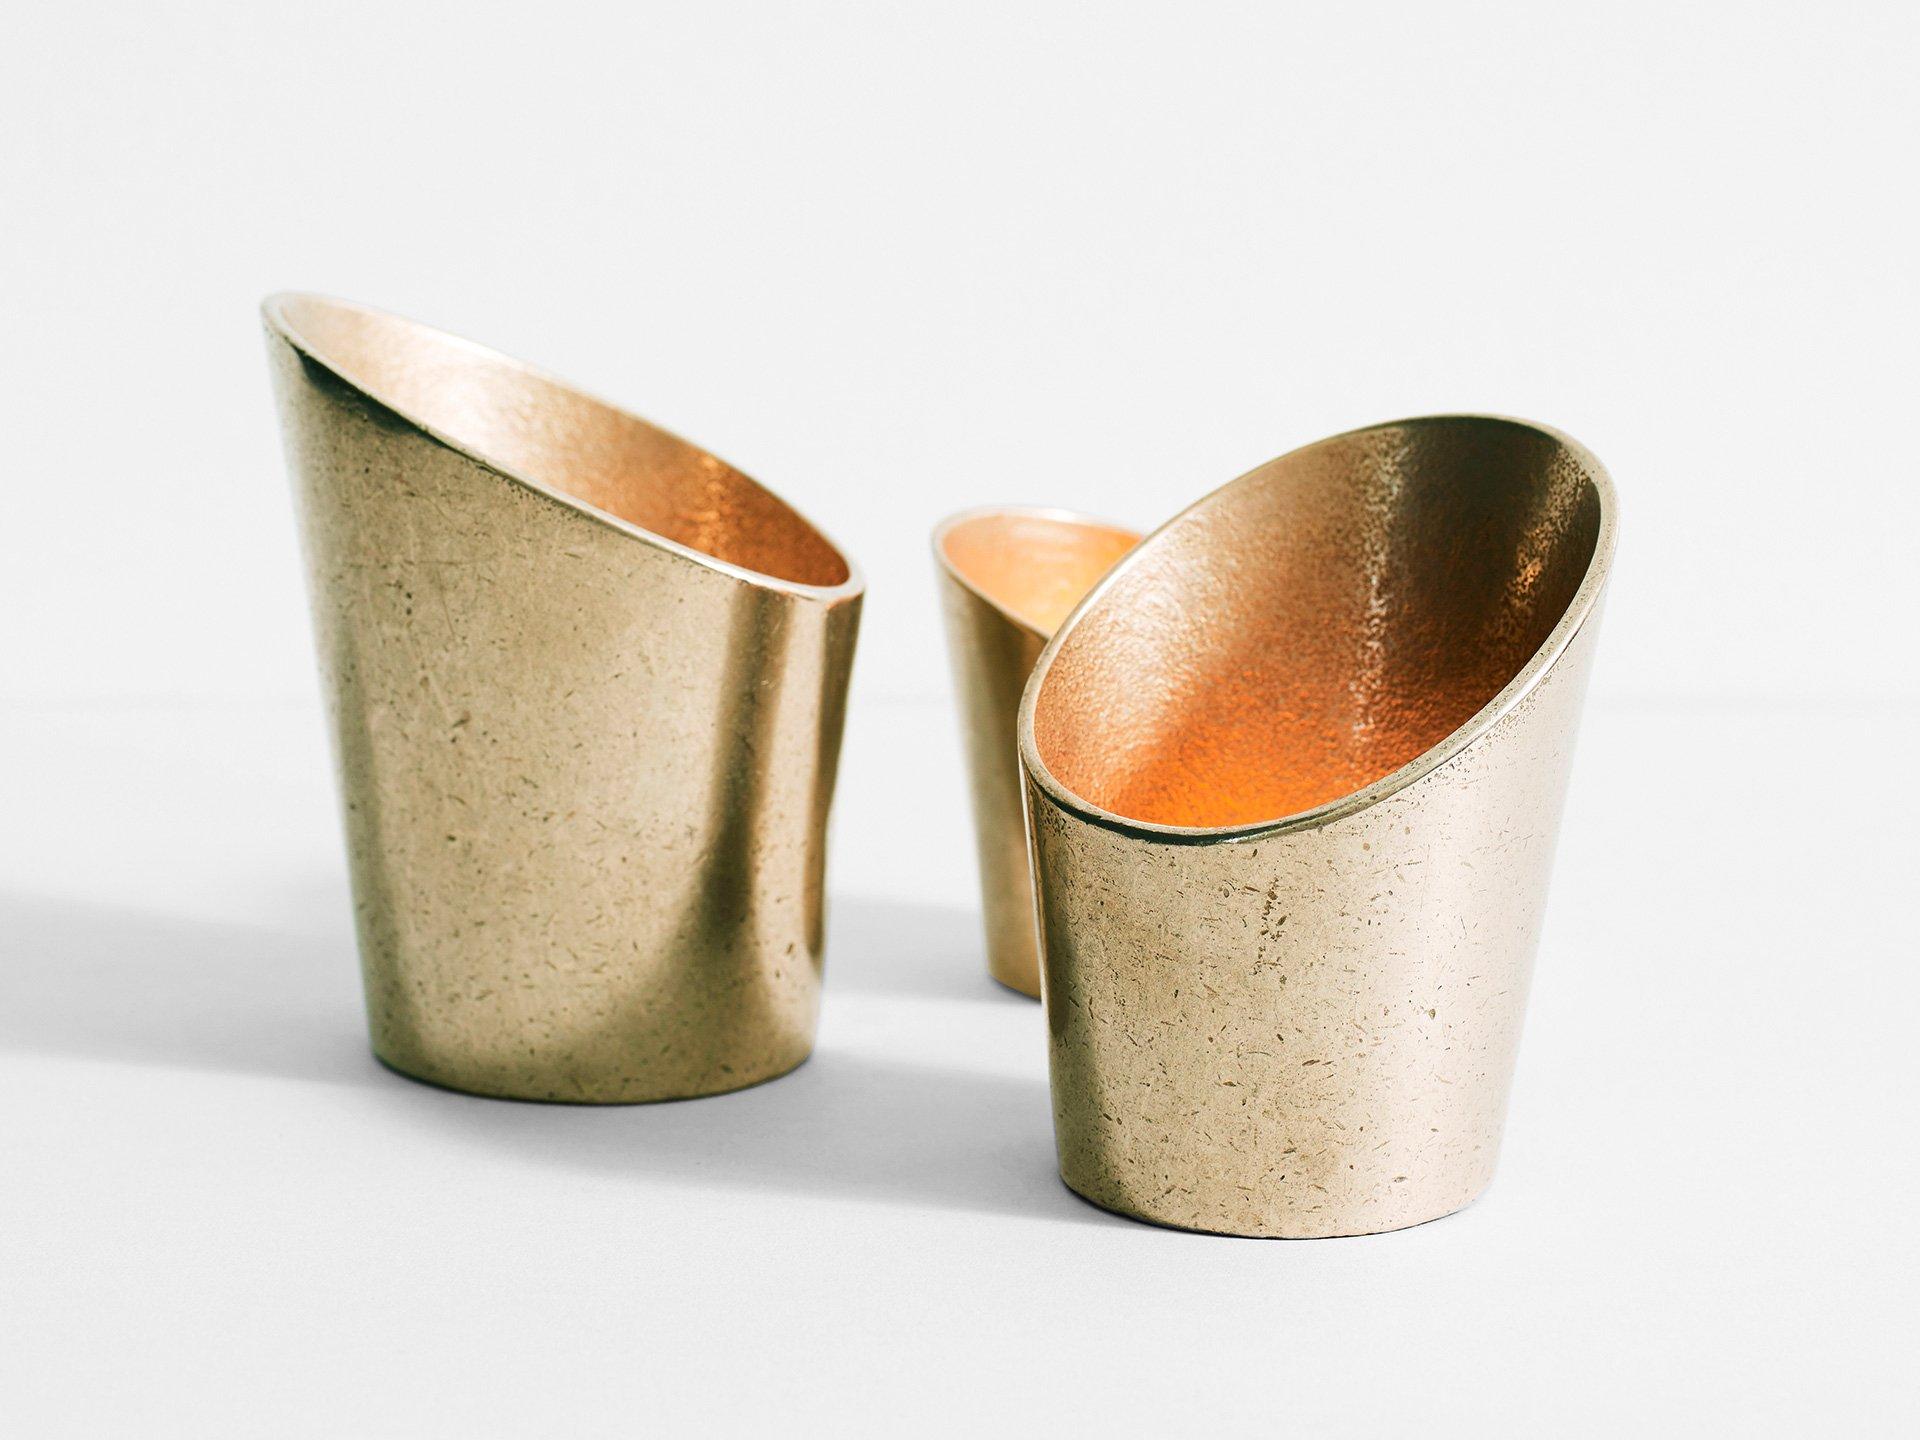 Set of 3 Sheath Tealight Holders by Henry Wilson
Dimensions: D 9 x H 11 cm (Dimensions may vary between pieces)
Materials: Brass

The sheath tealight holders utilise the reflectivity of soid brass to create a warm atmospheric glow. They are designed